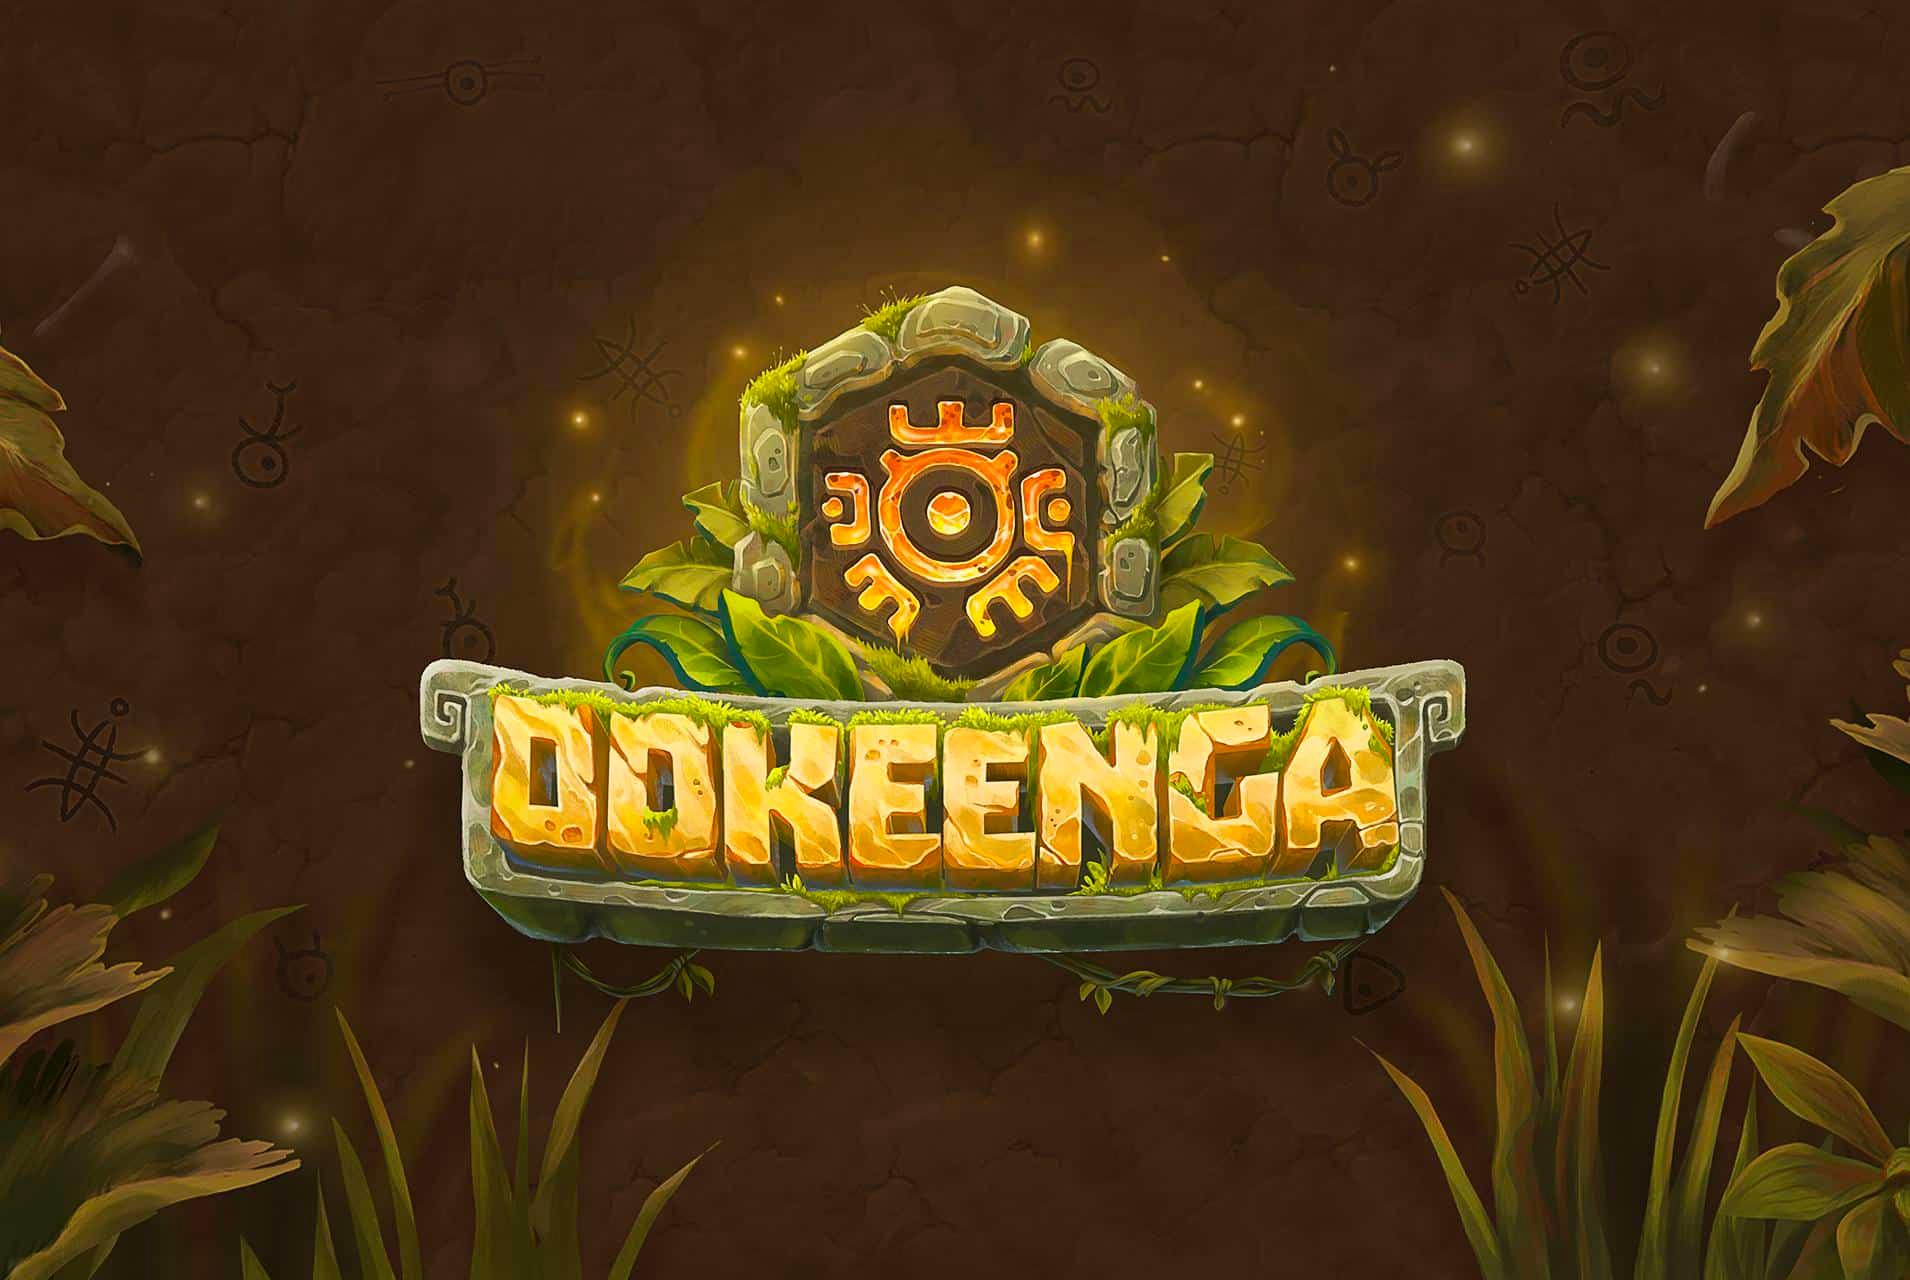 Ookeenga (OKG) - Game Review - Play Games